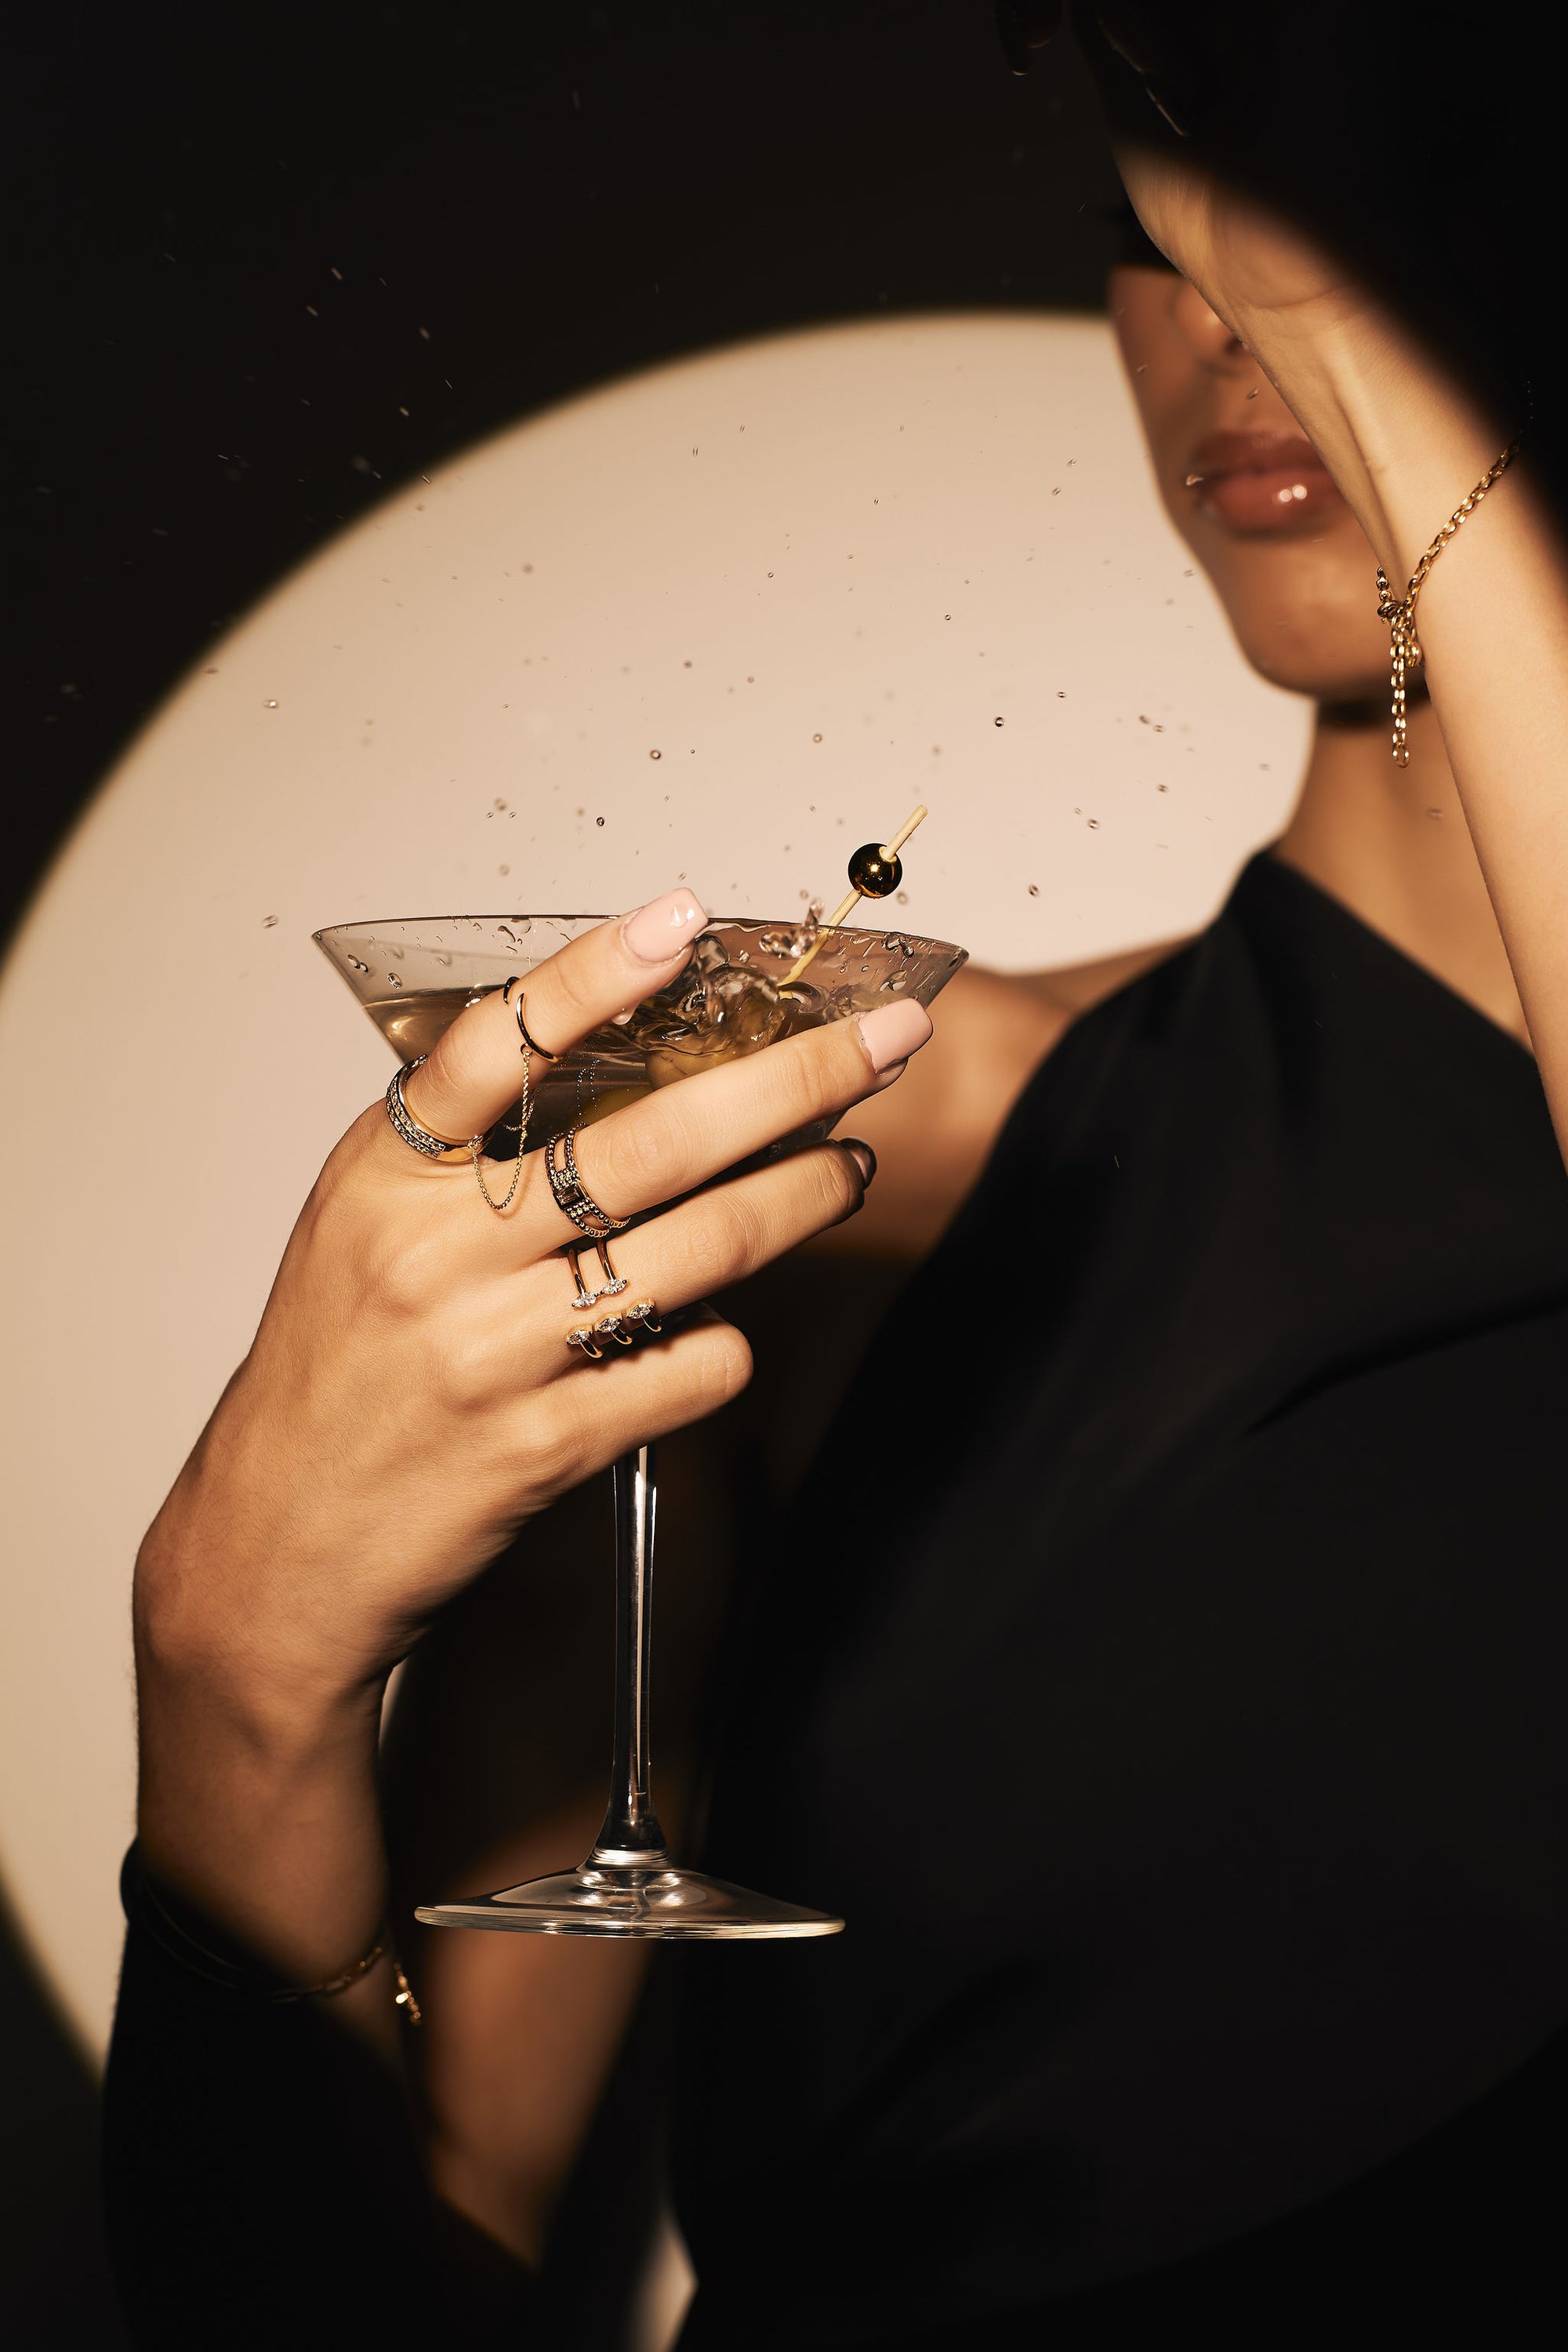 A woman adorned with Nijma M Fine Jewelry's The Double - Chained Yellow Gold Diamond Band and Knuckle Rings, along with dainty gold chains and a bracelet, holds a martini glass garnished with an olive. She is dressed in a sleek black outfit, strikingly highlighted by a spotlight that casts a shadow, drawing attention to the glass and her elegantly decorated hand.